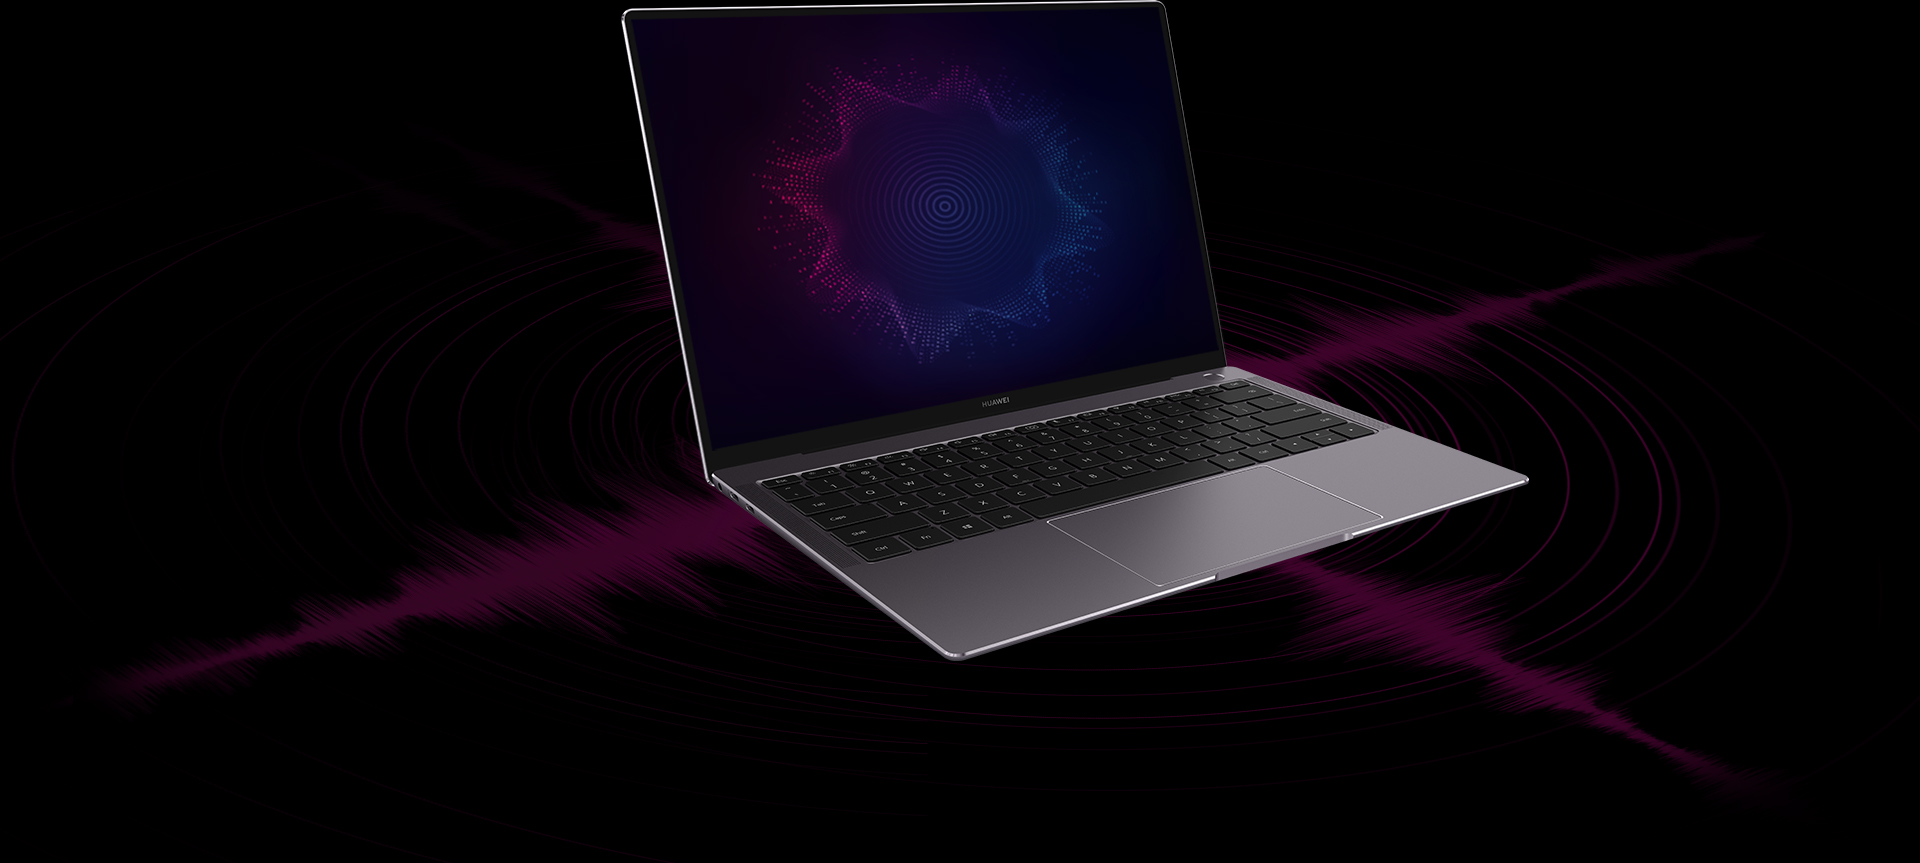 huawei matebook x pro-forte interaction vocale claire